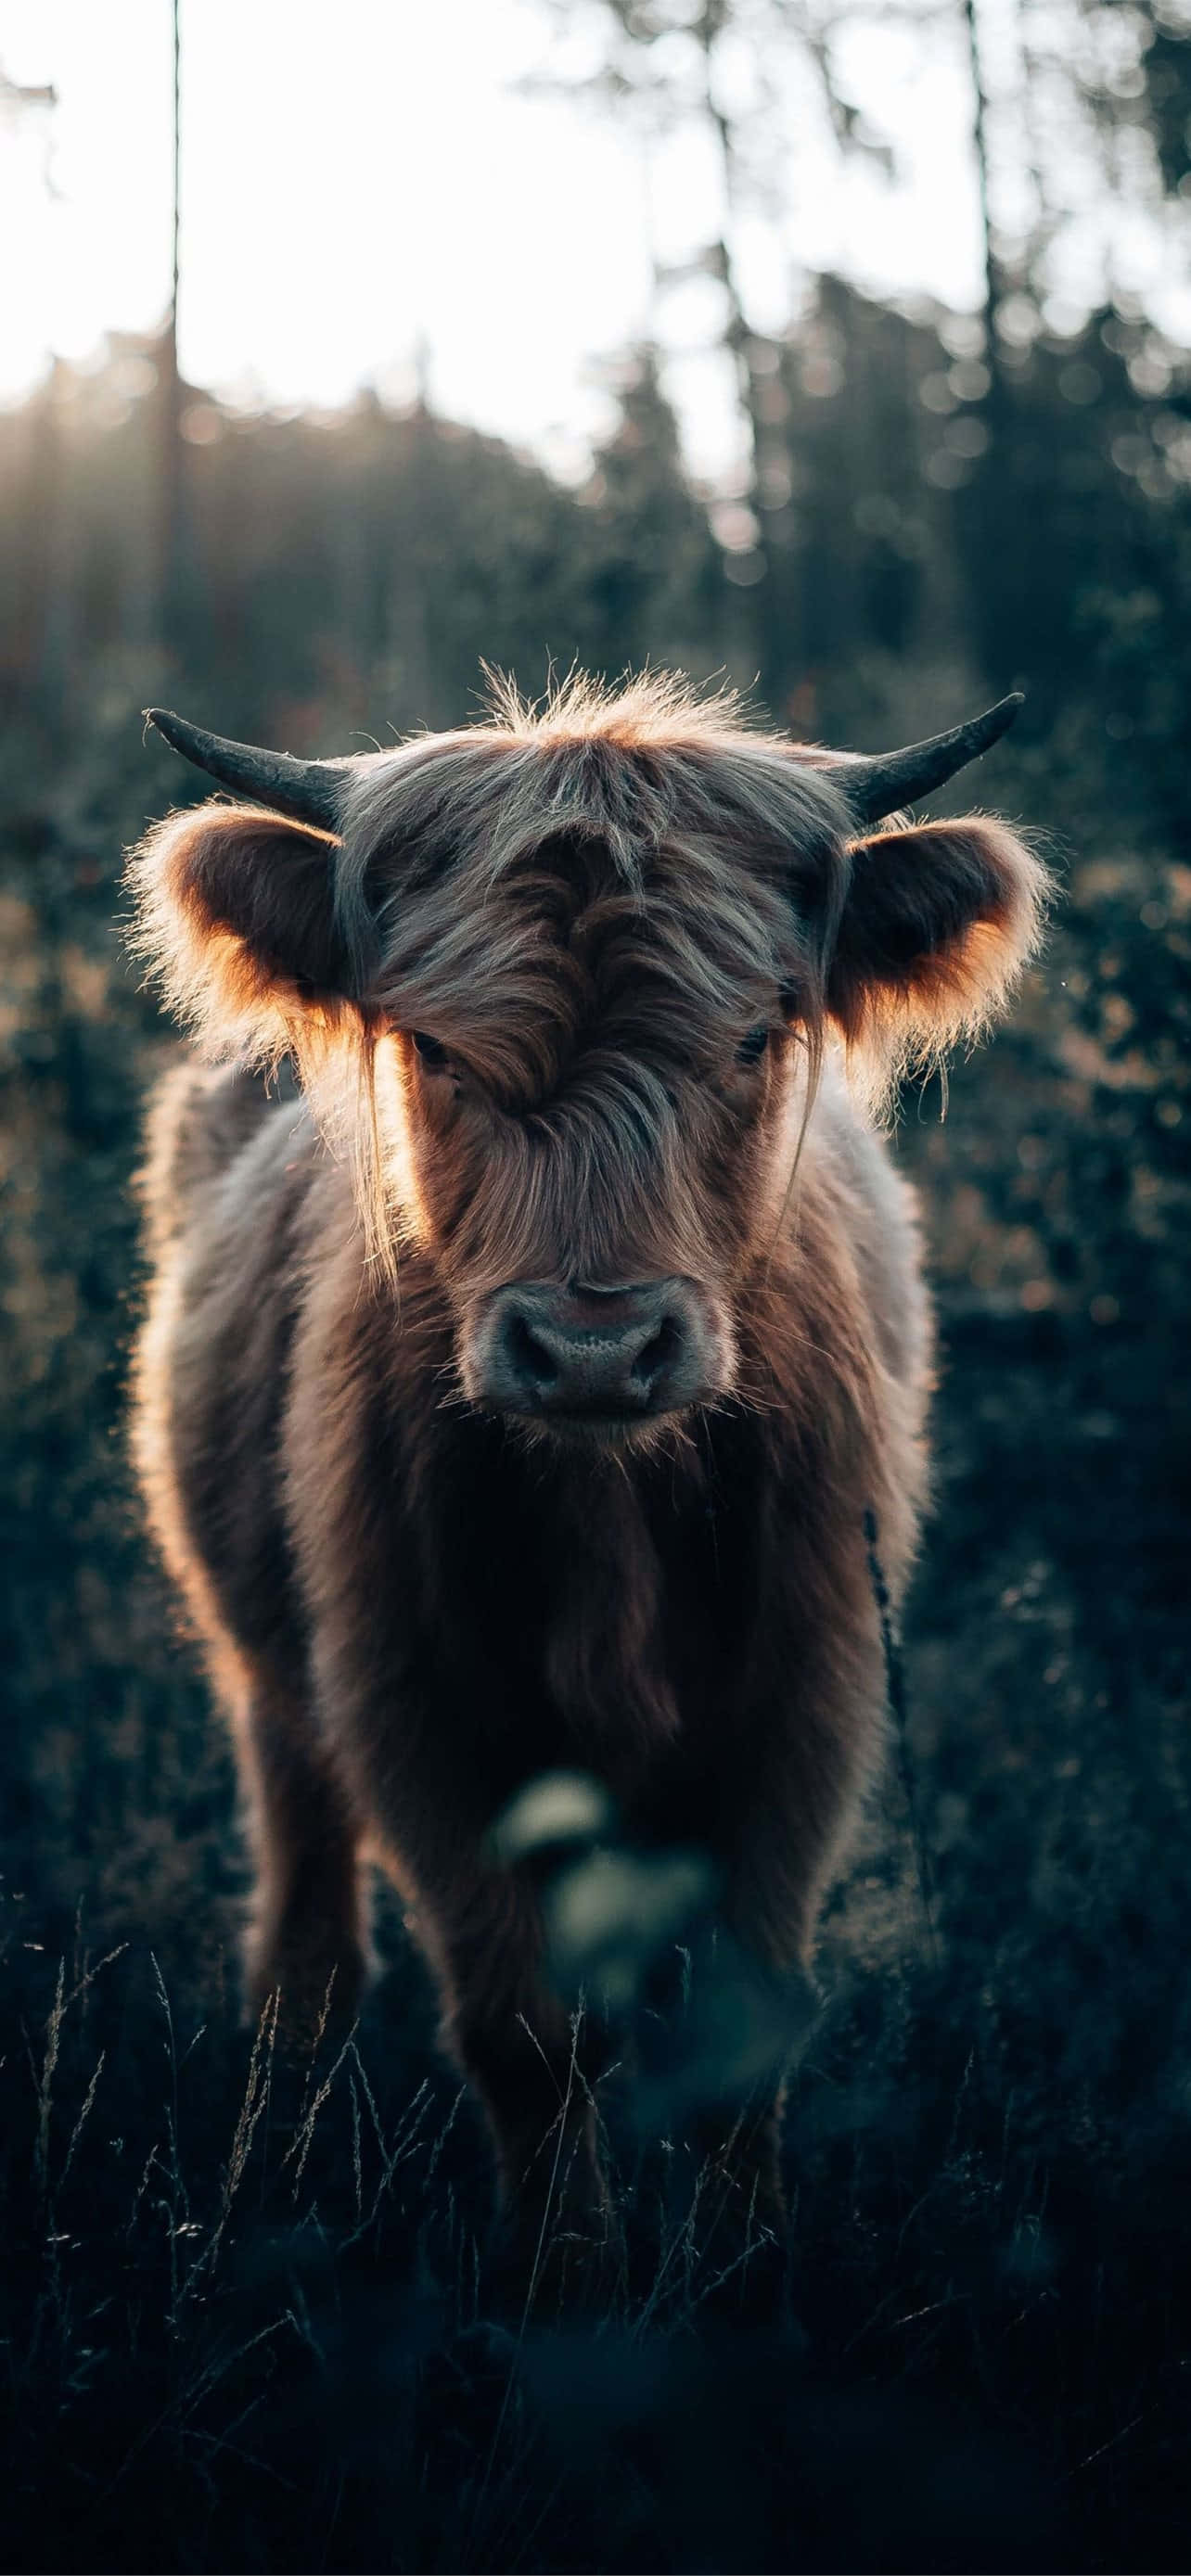 Mooove Over This Adorable Cow!